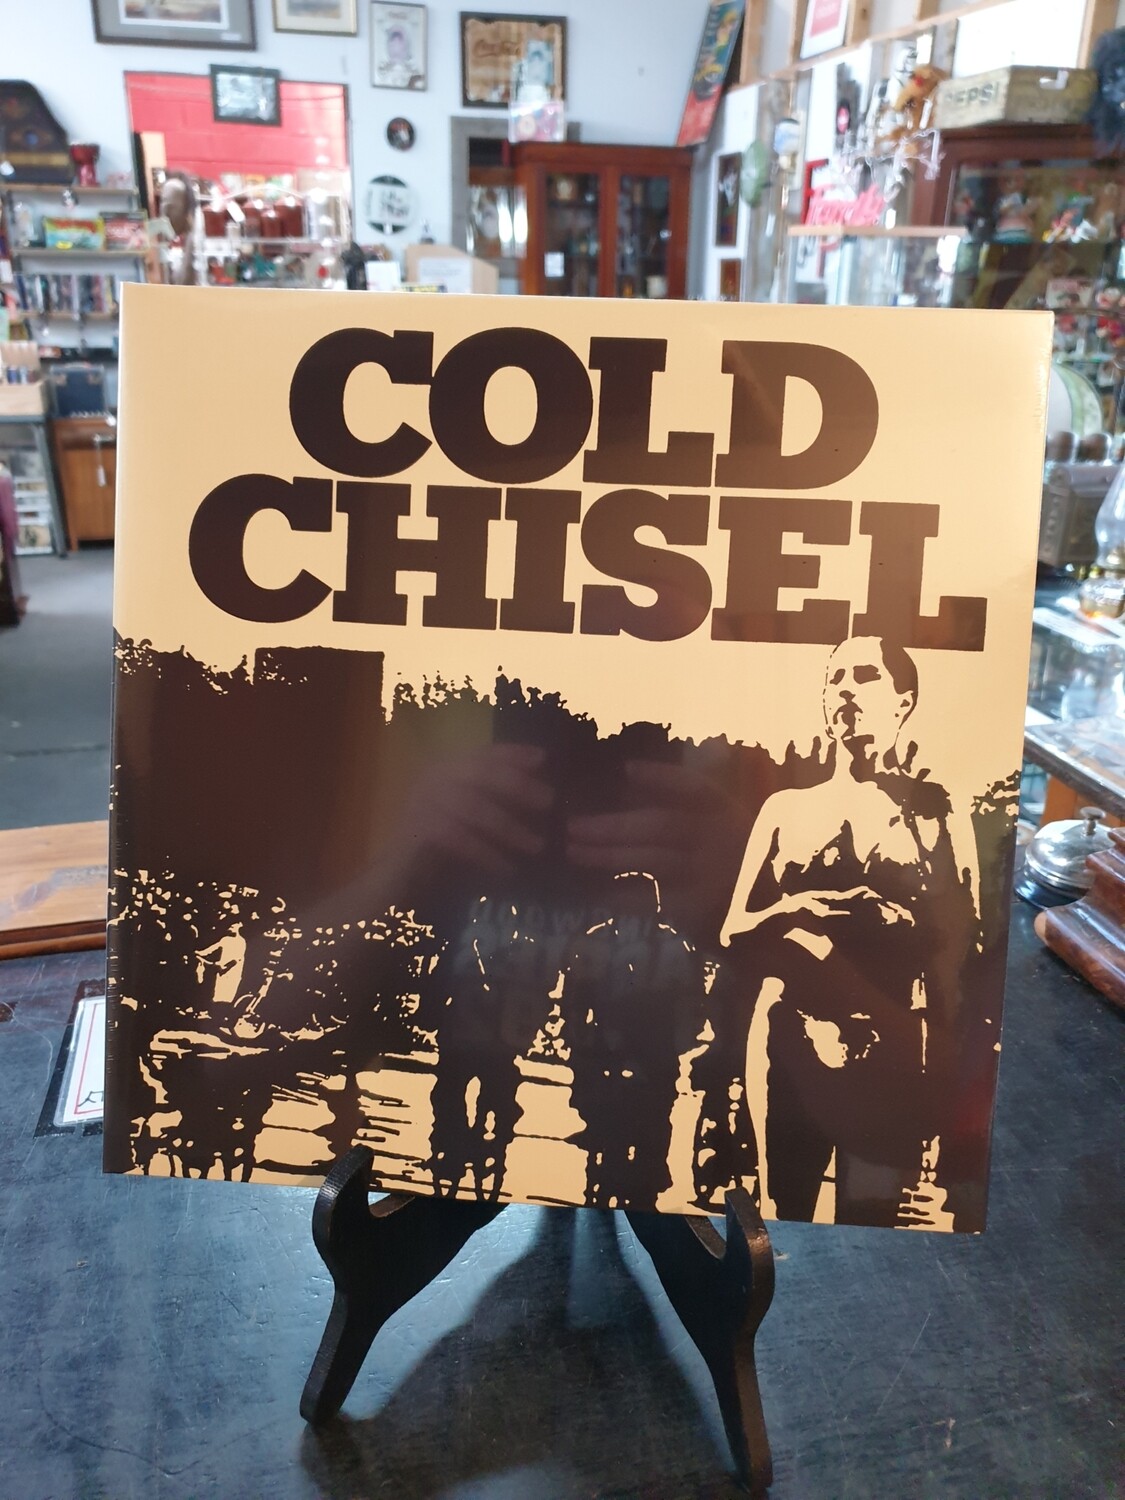 COLD CHISEL "NEW"